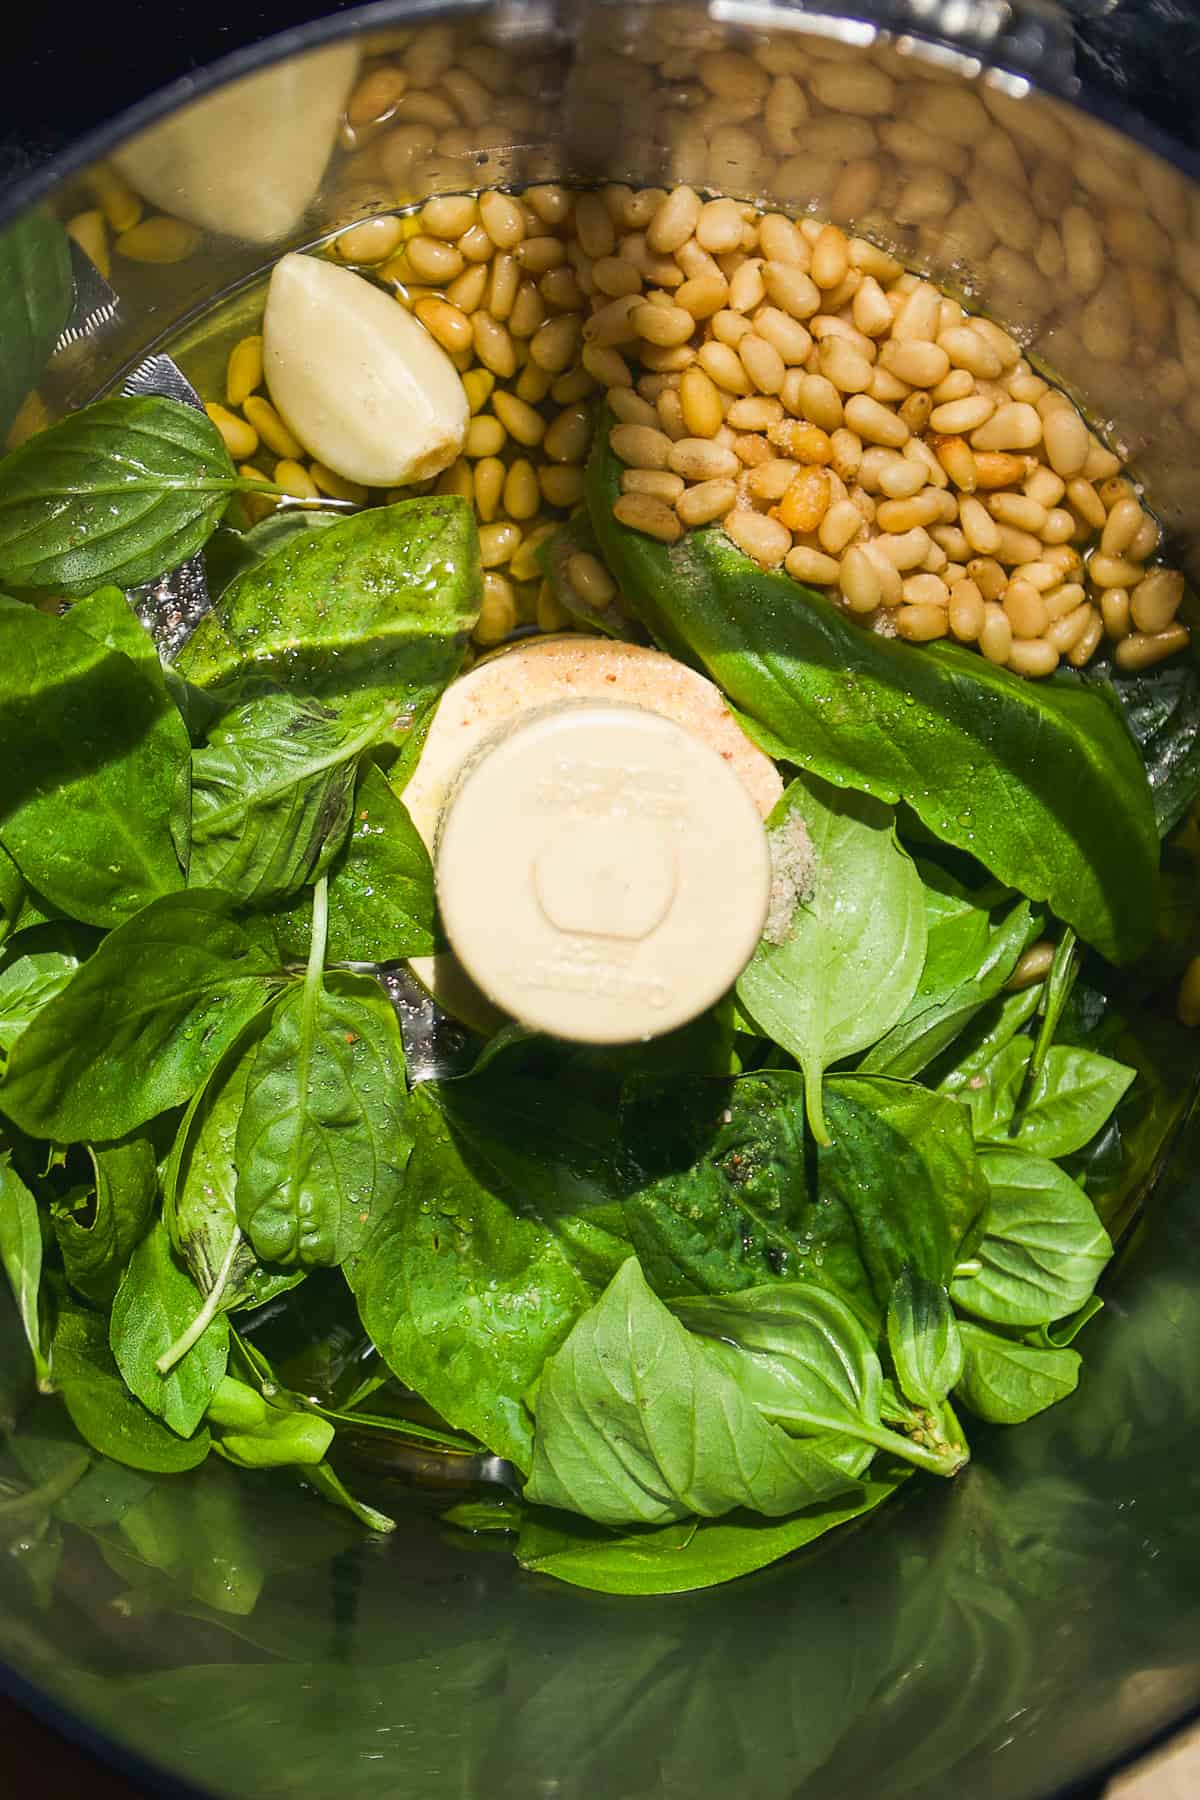 Basil pesto ingredients in a food processor about to be mixed.